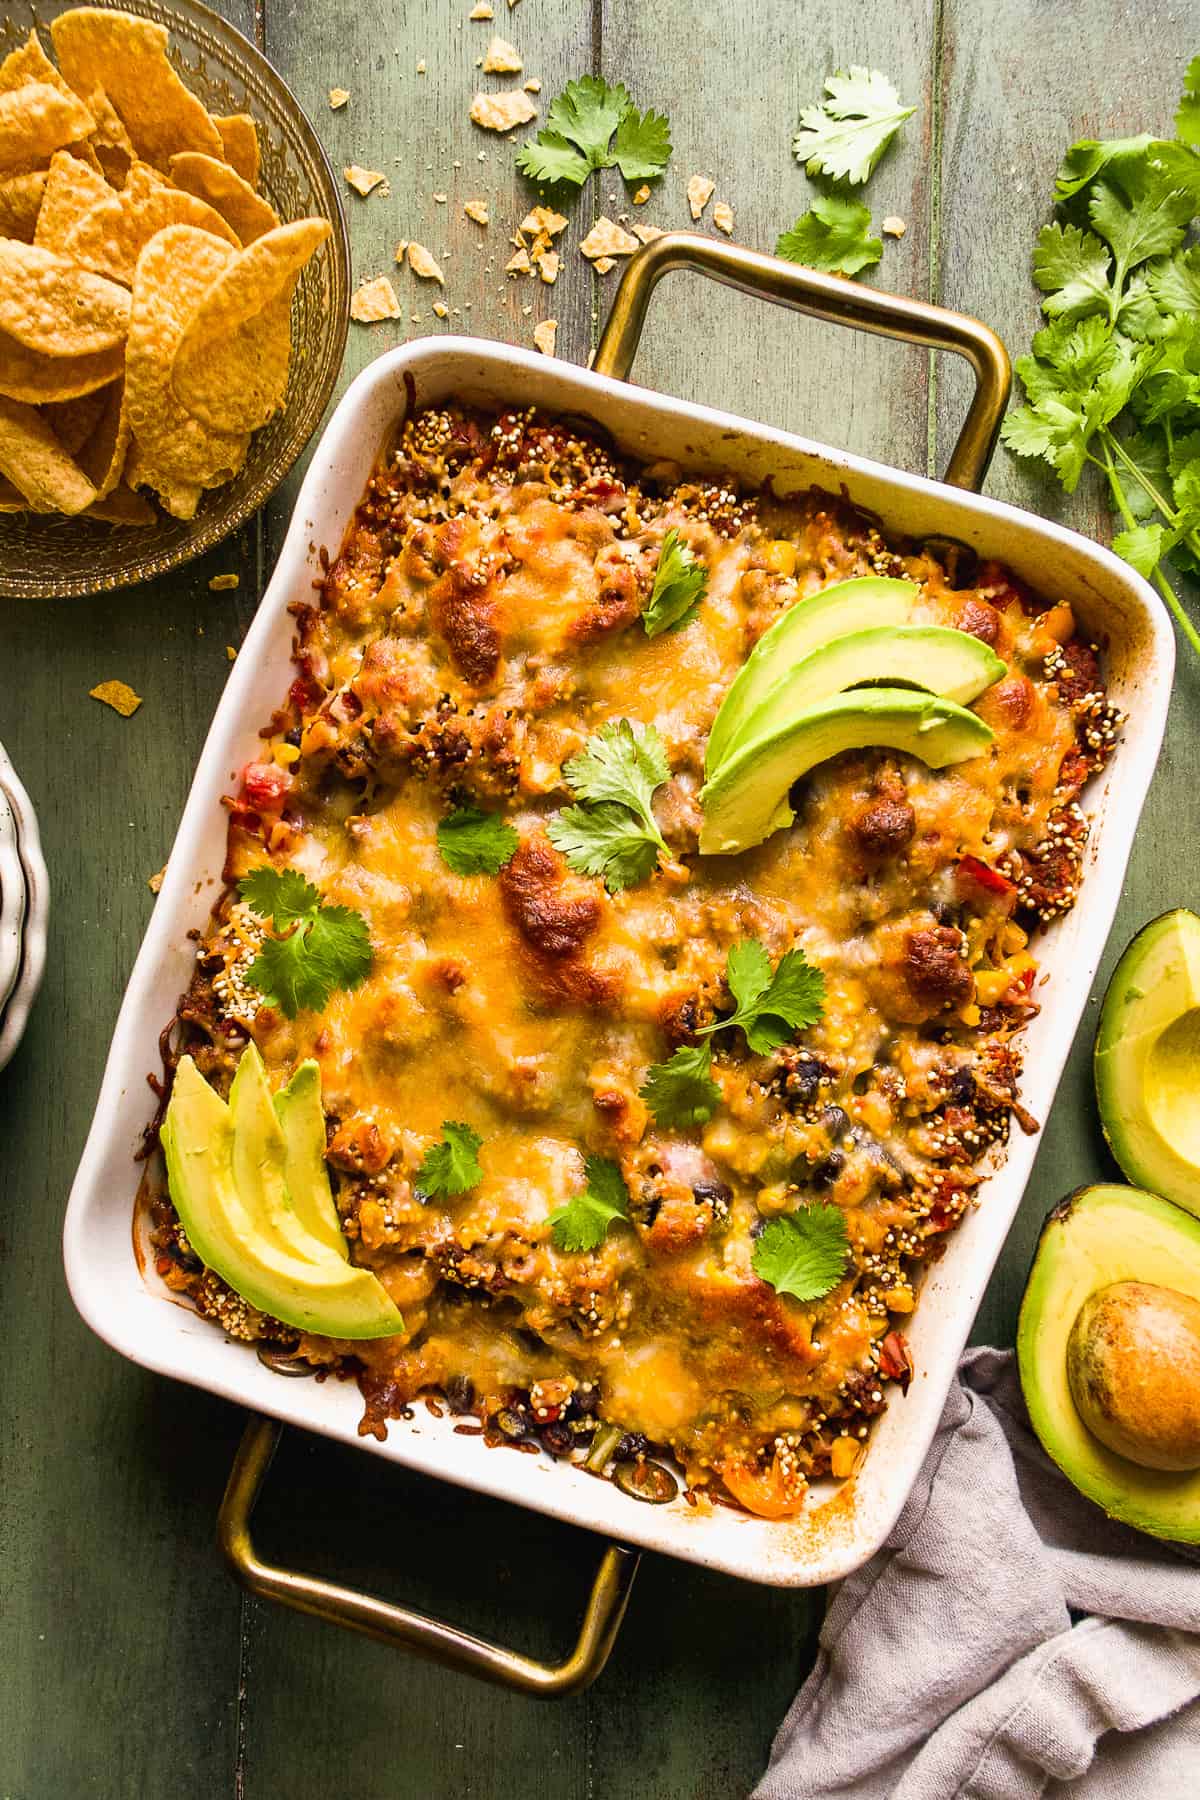 Taco casserole with cheese and avocado baked.